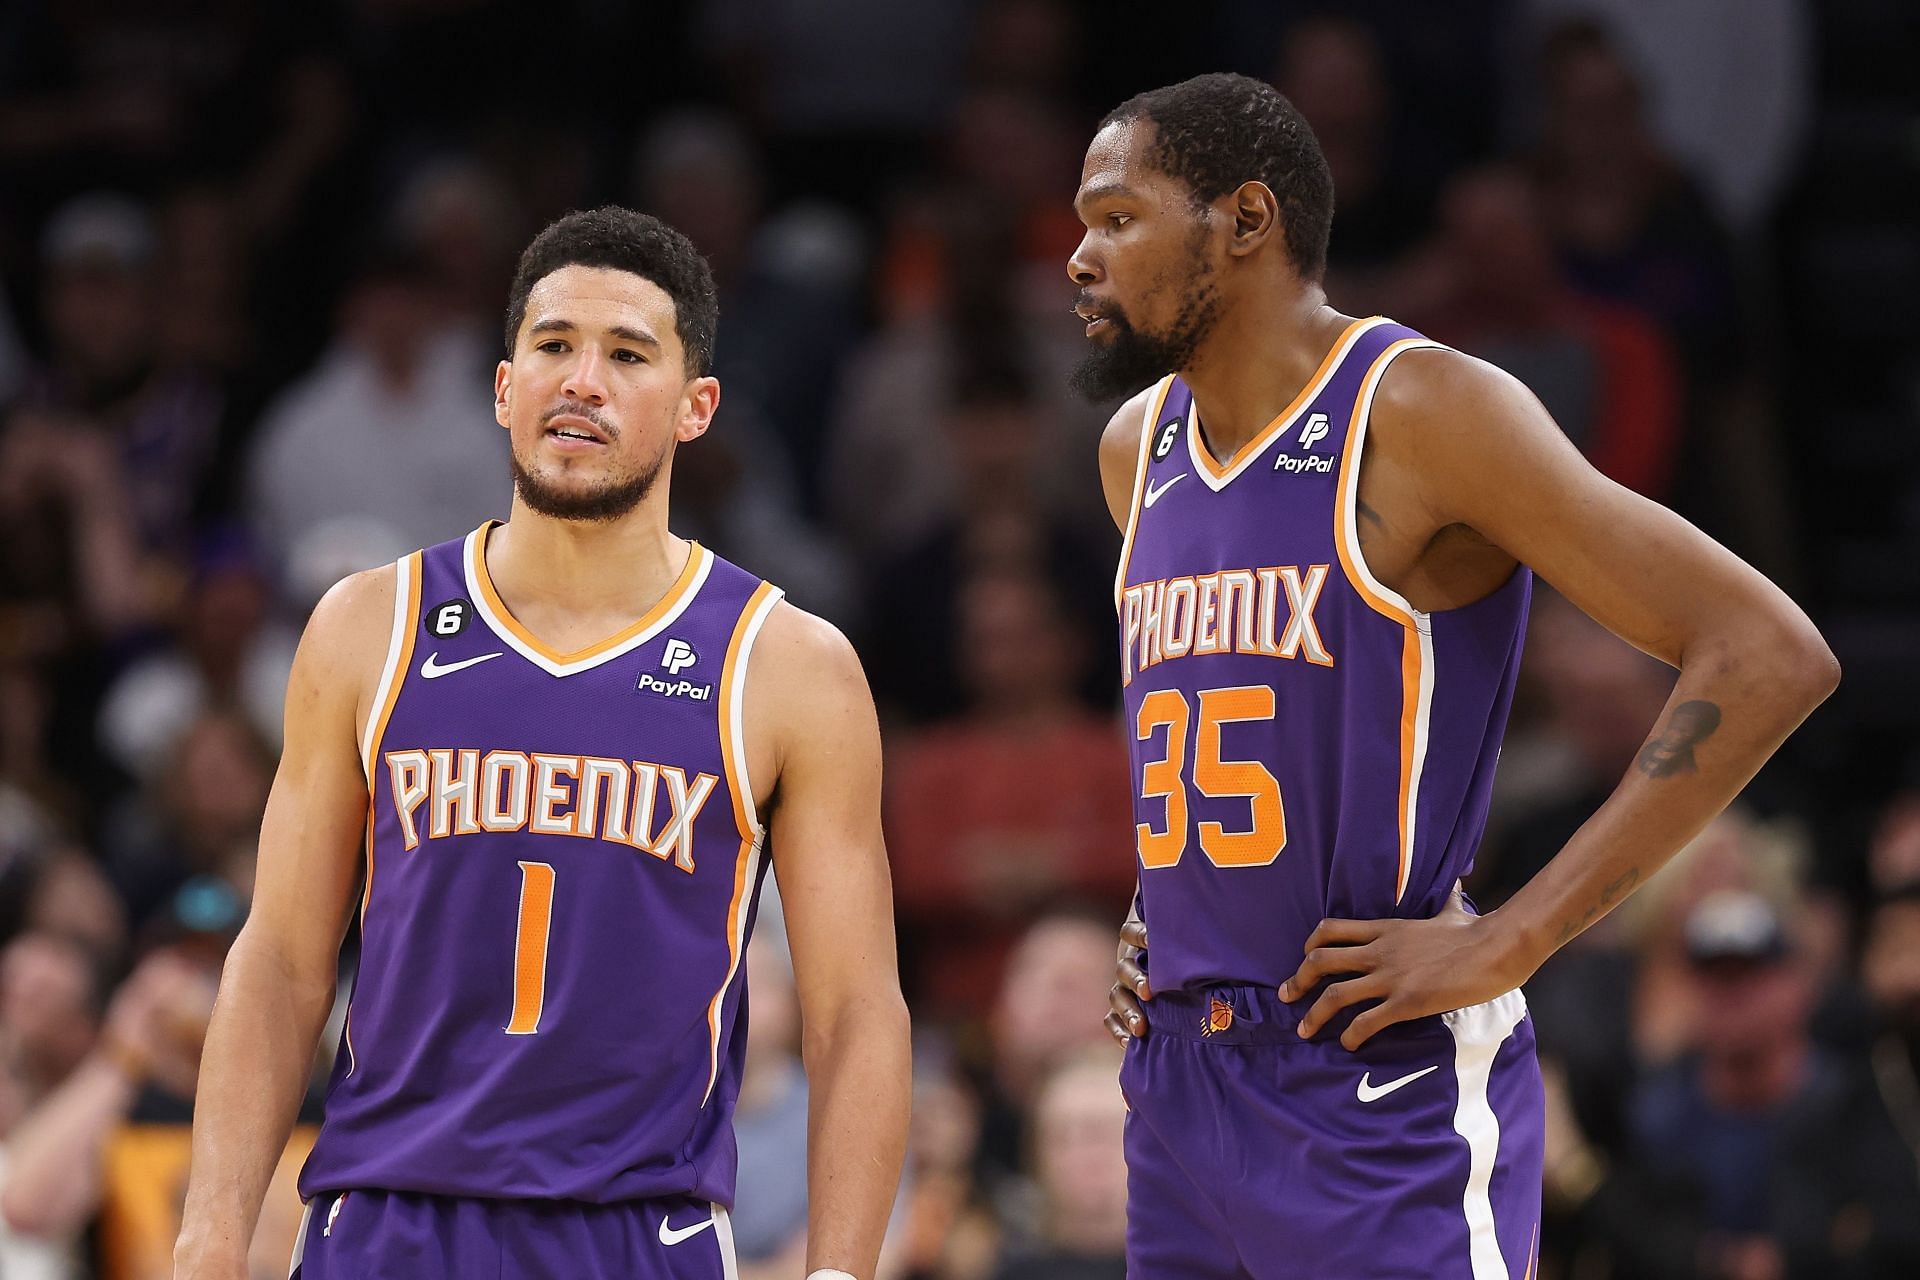 Phoenix Suns stars Devin Booker and Kevin Durant